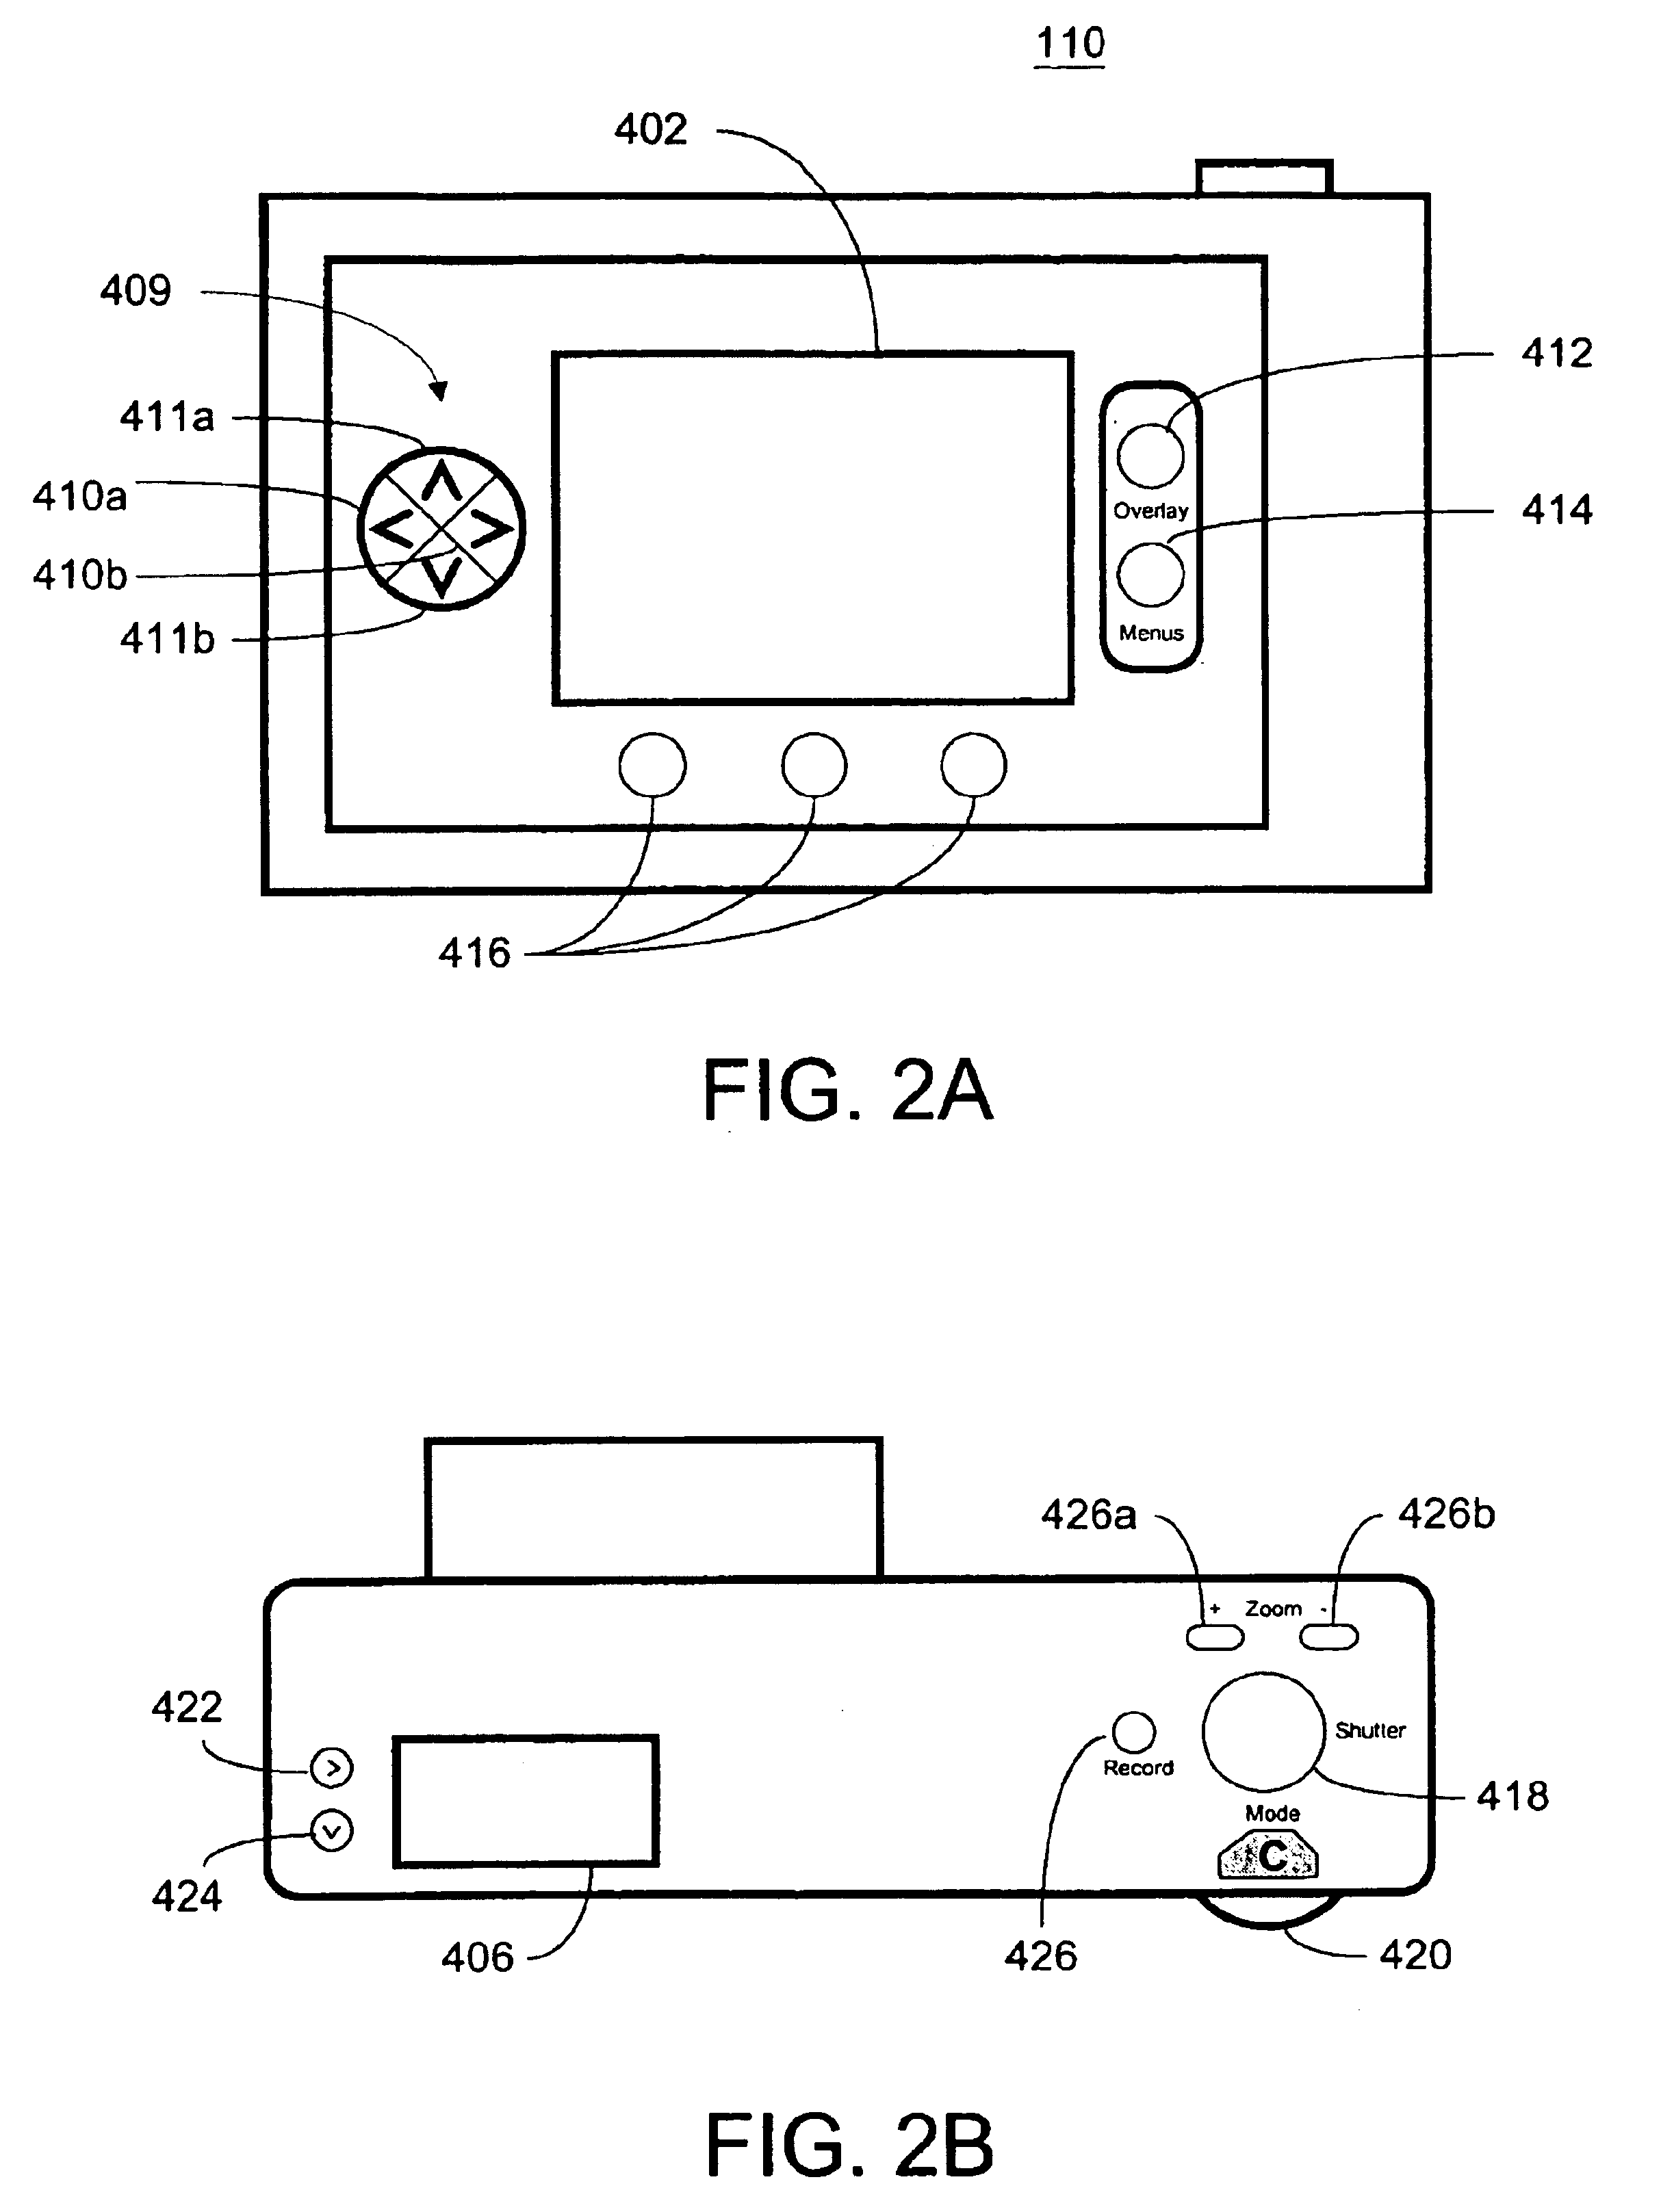 Method and apparatus for managing image categories in a digital camera to enhance performance of a high-capacity image storage media